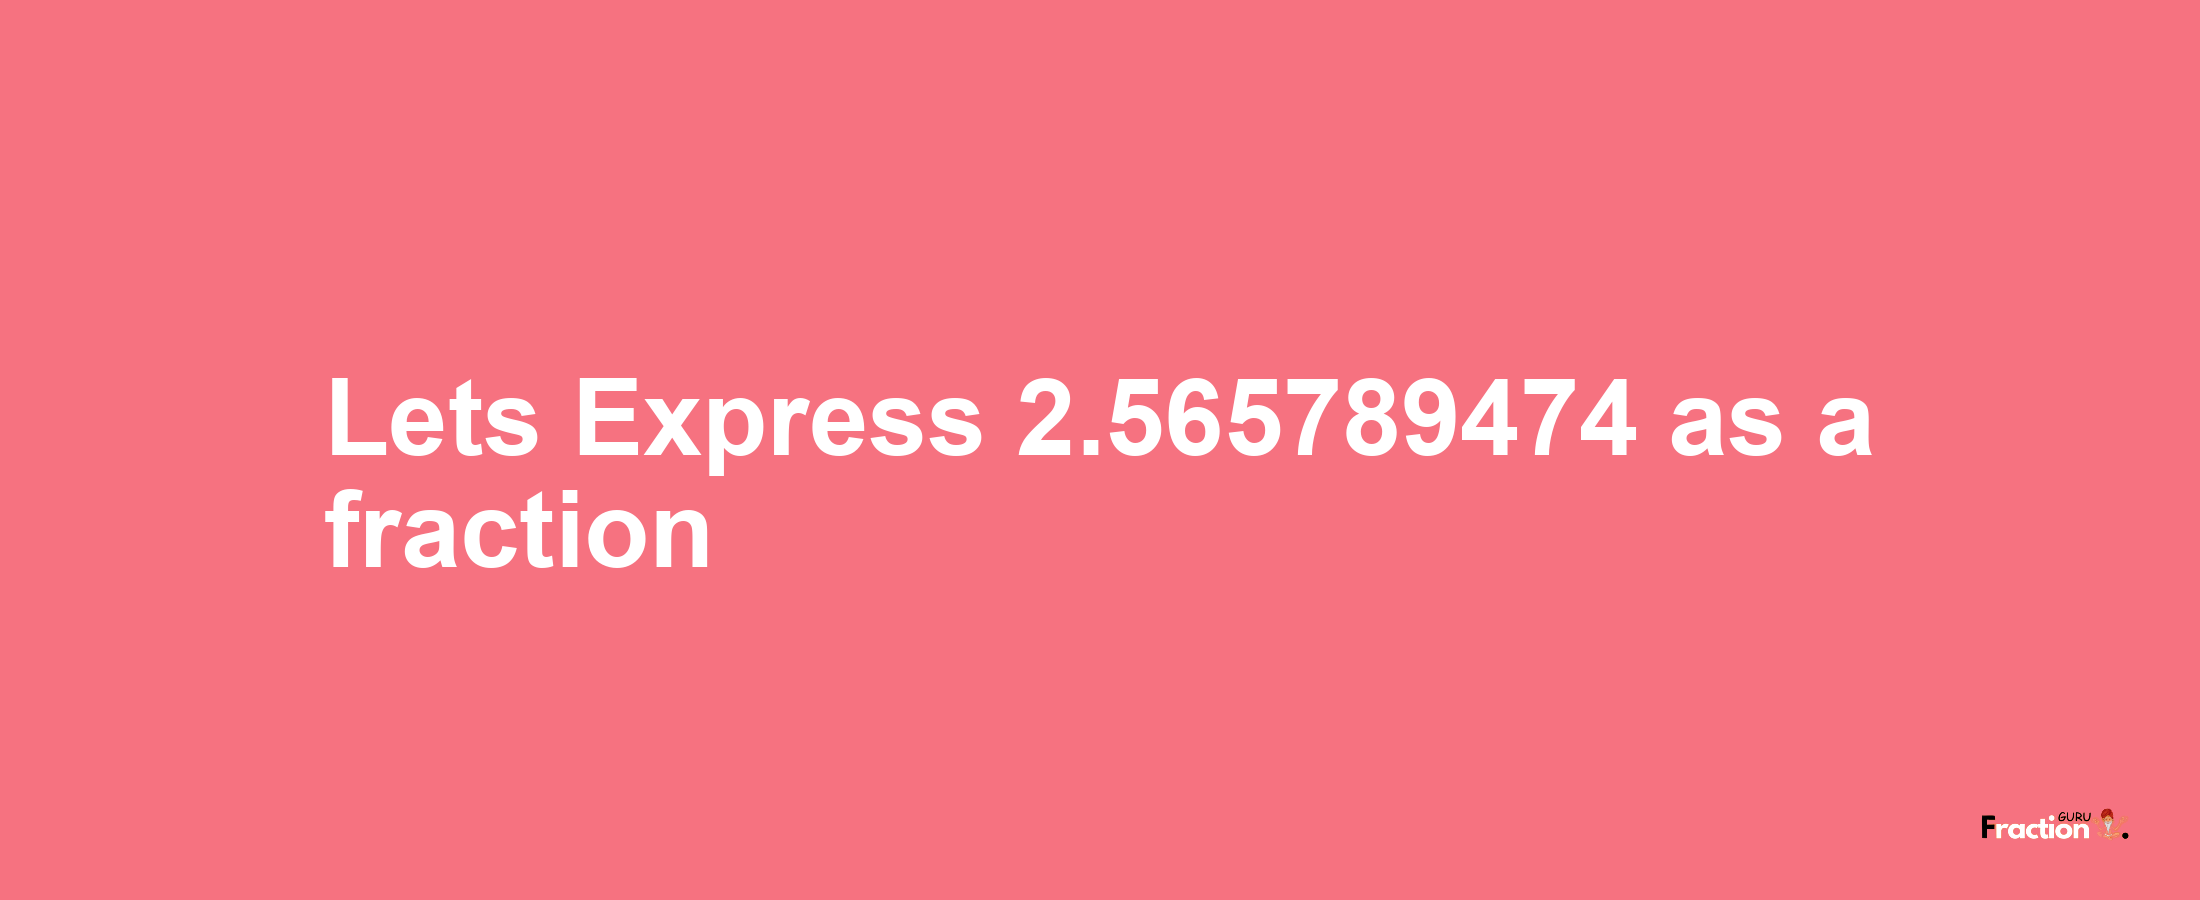 Lets Express 2.565789474 as afraction